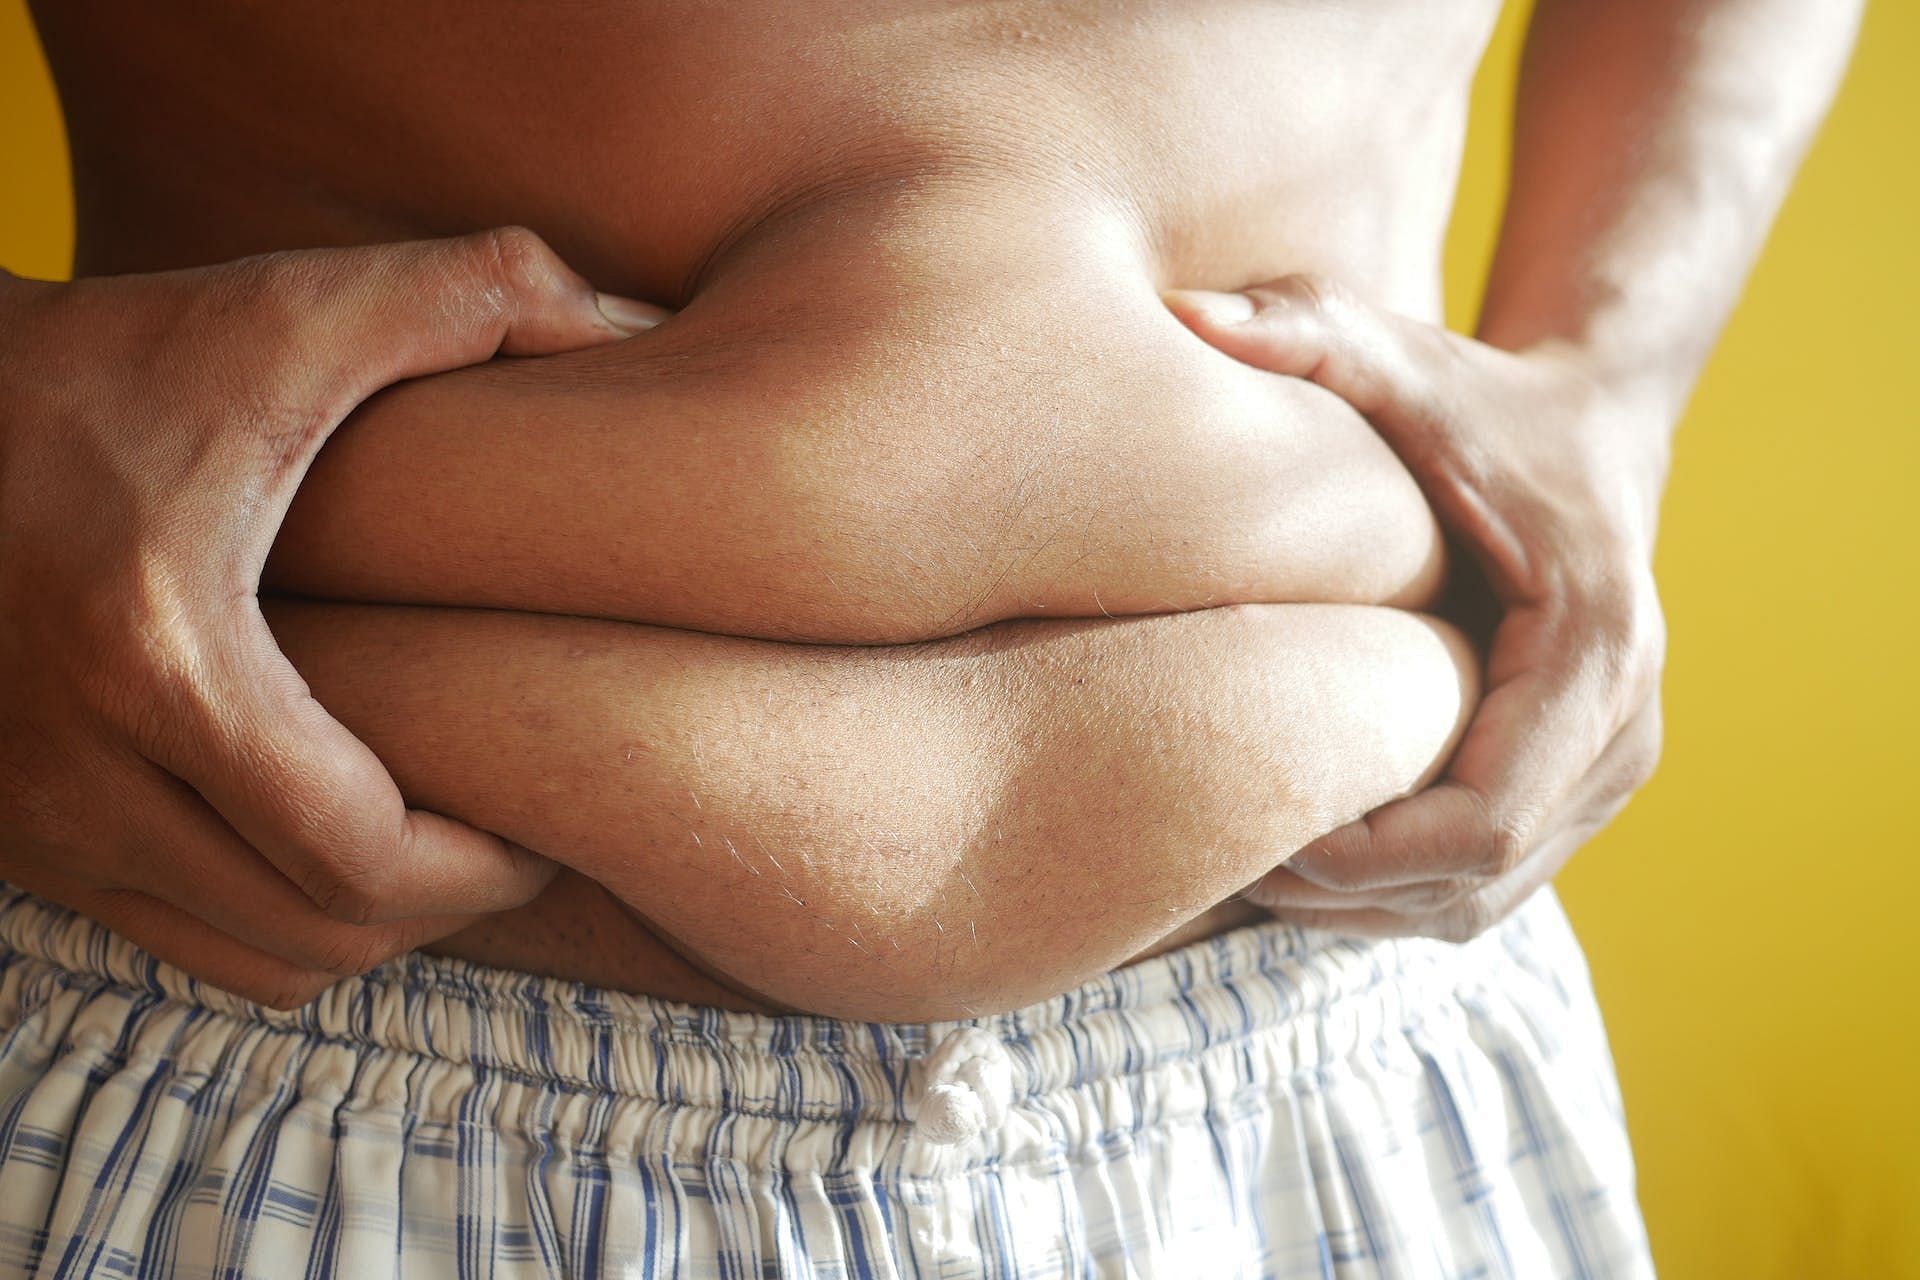 Excessive belly fat can be exhausting (Image via Pexels/Towfiqu barbhuiya)